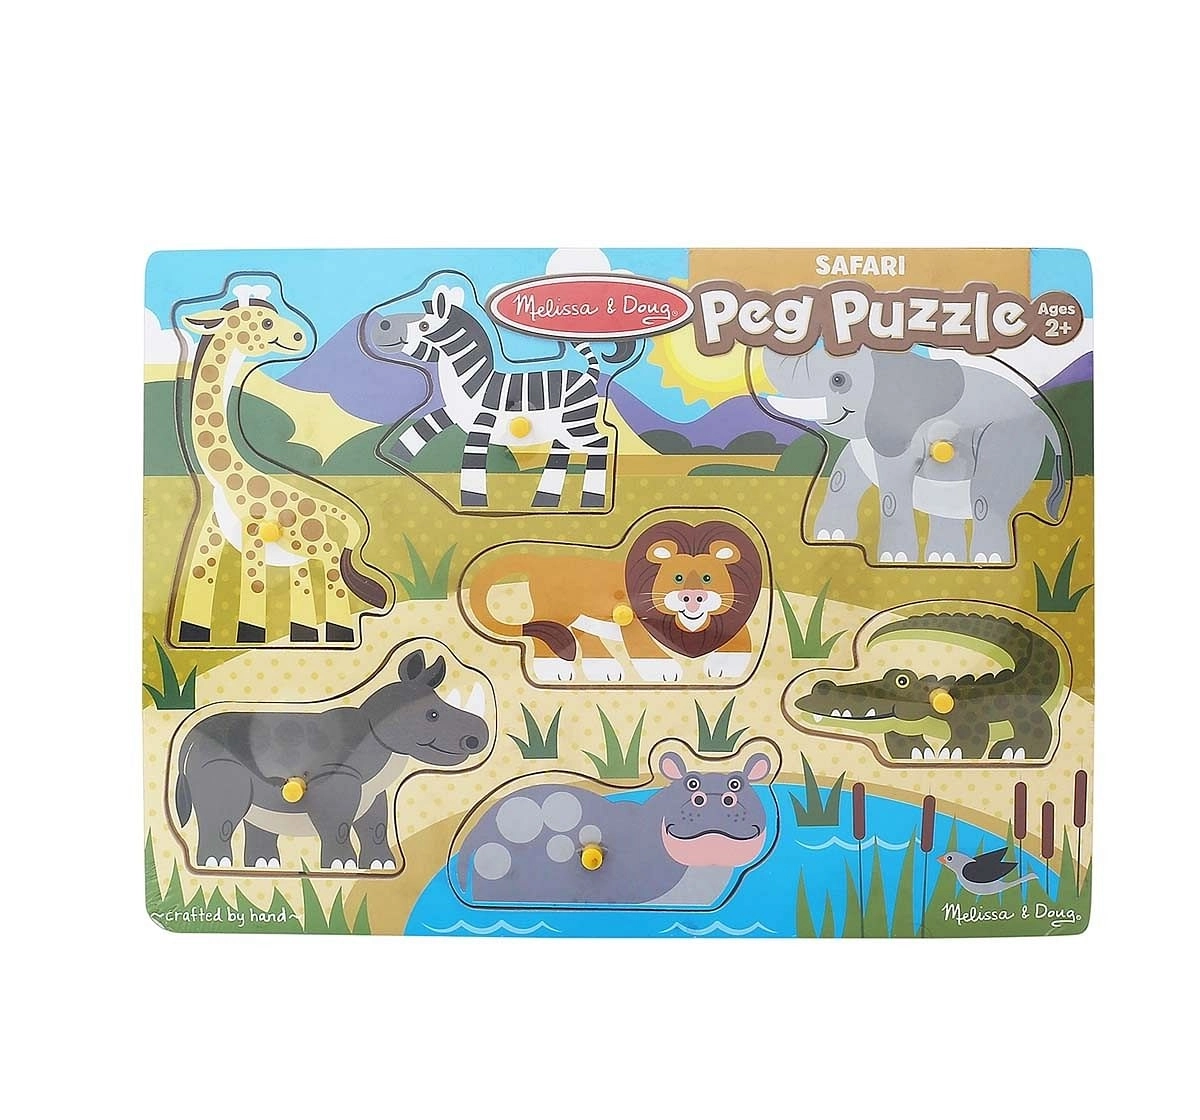 Melissa & Doug Safari Peg Puzzle (Colorful Animal Artwork, Extra-Thick Wooden Construction, 7 Pieces) Wooden Toys for Kids age 24M+ 